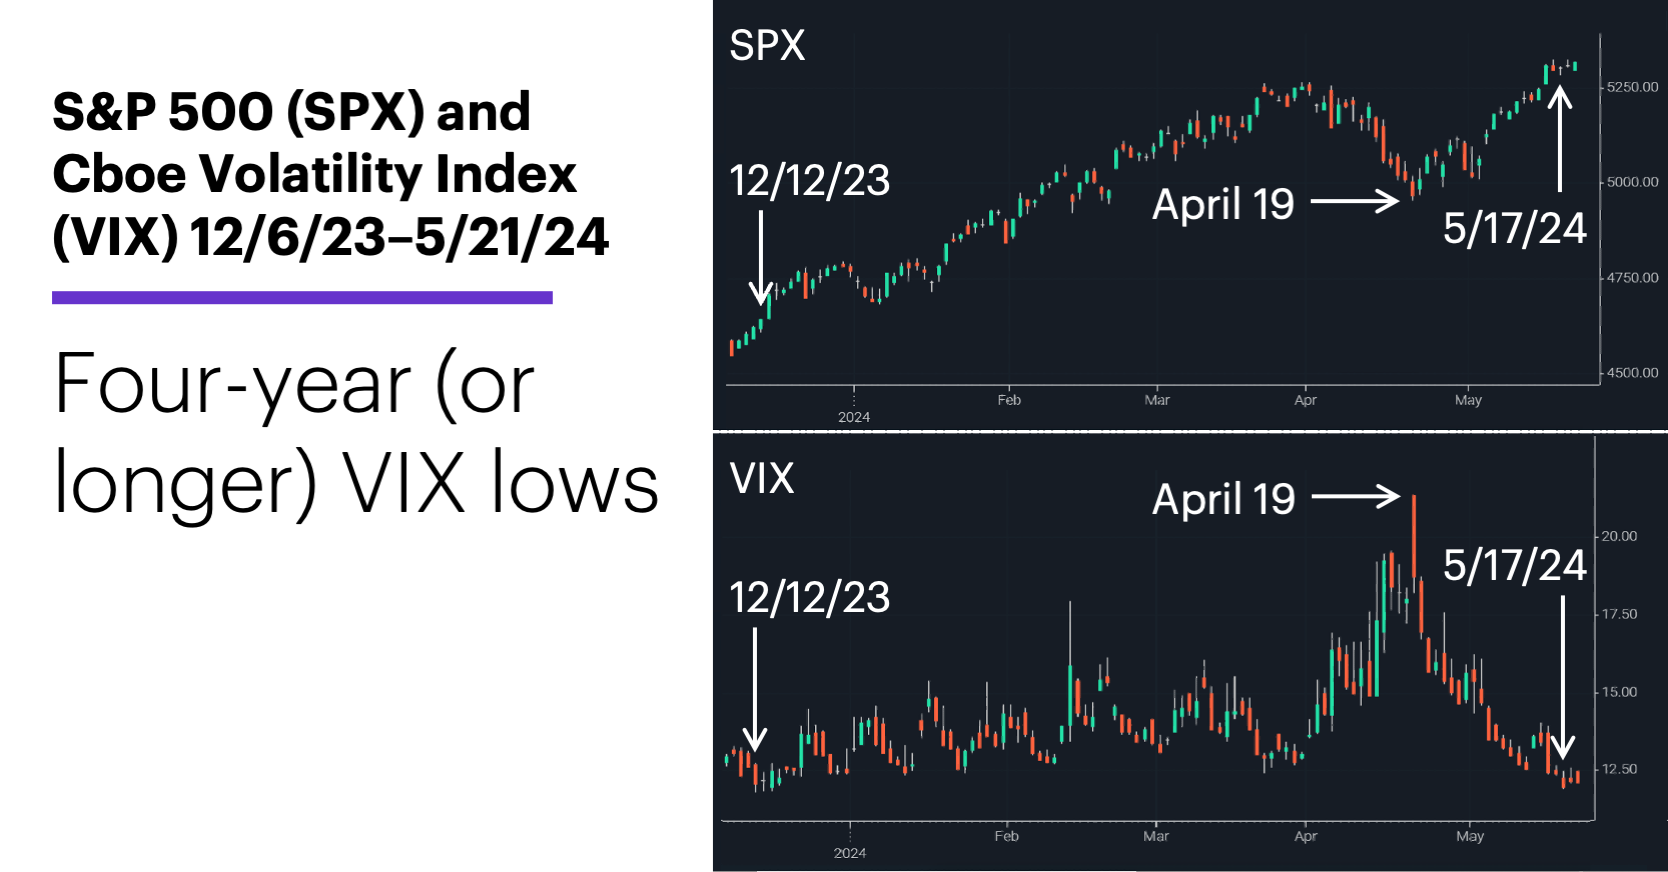 Chart 1: S&P 500 (SPX) and Cboe Volatility Index (VIX) 12/6/23–5/21/24. S&P 500 (SPX) and VIX price chart. Four-year (or longer) VIX lows